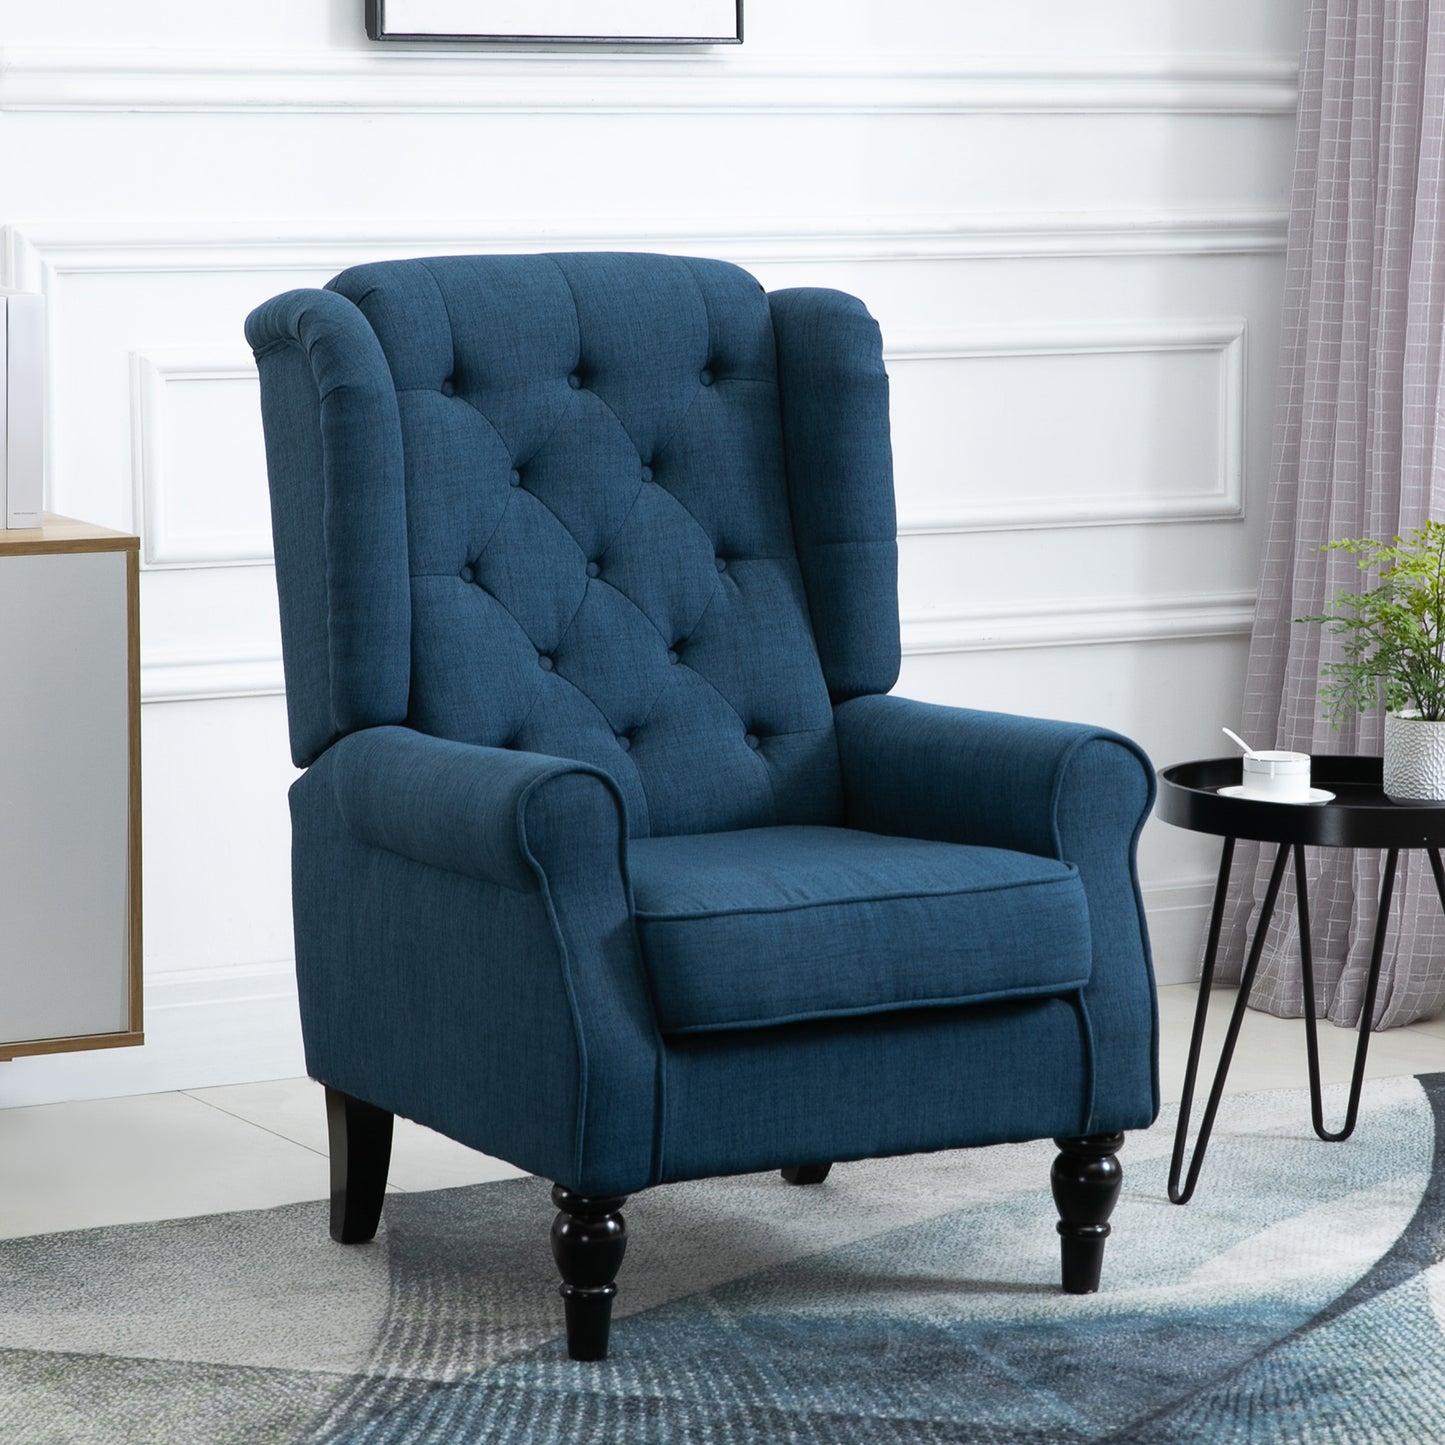 HOMCOM Wingback Accent Chair, Retro Upholstered Button Tufted Occasional Chair for Living Room and Bedroom, Blue